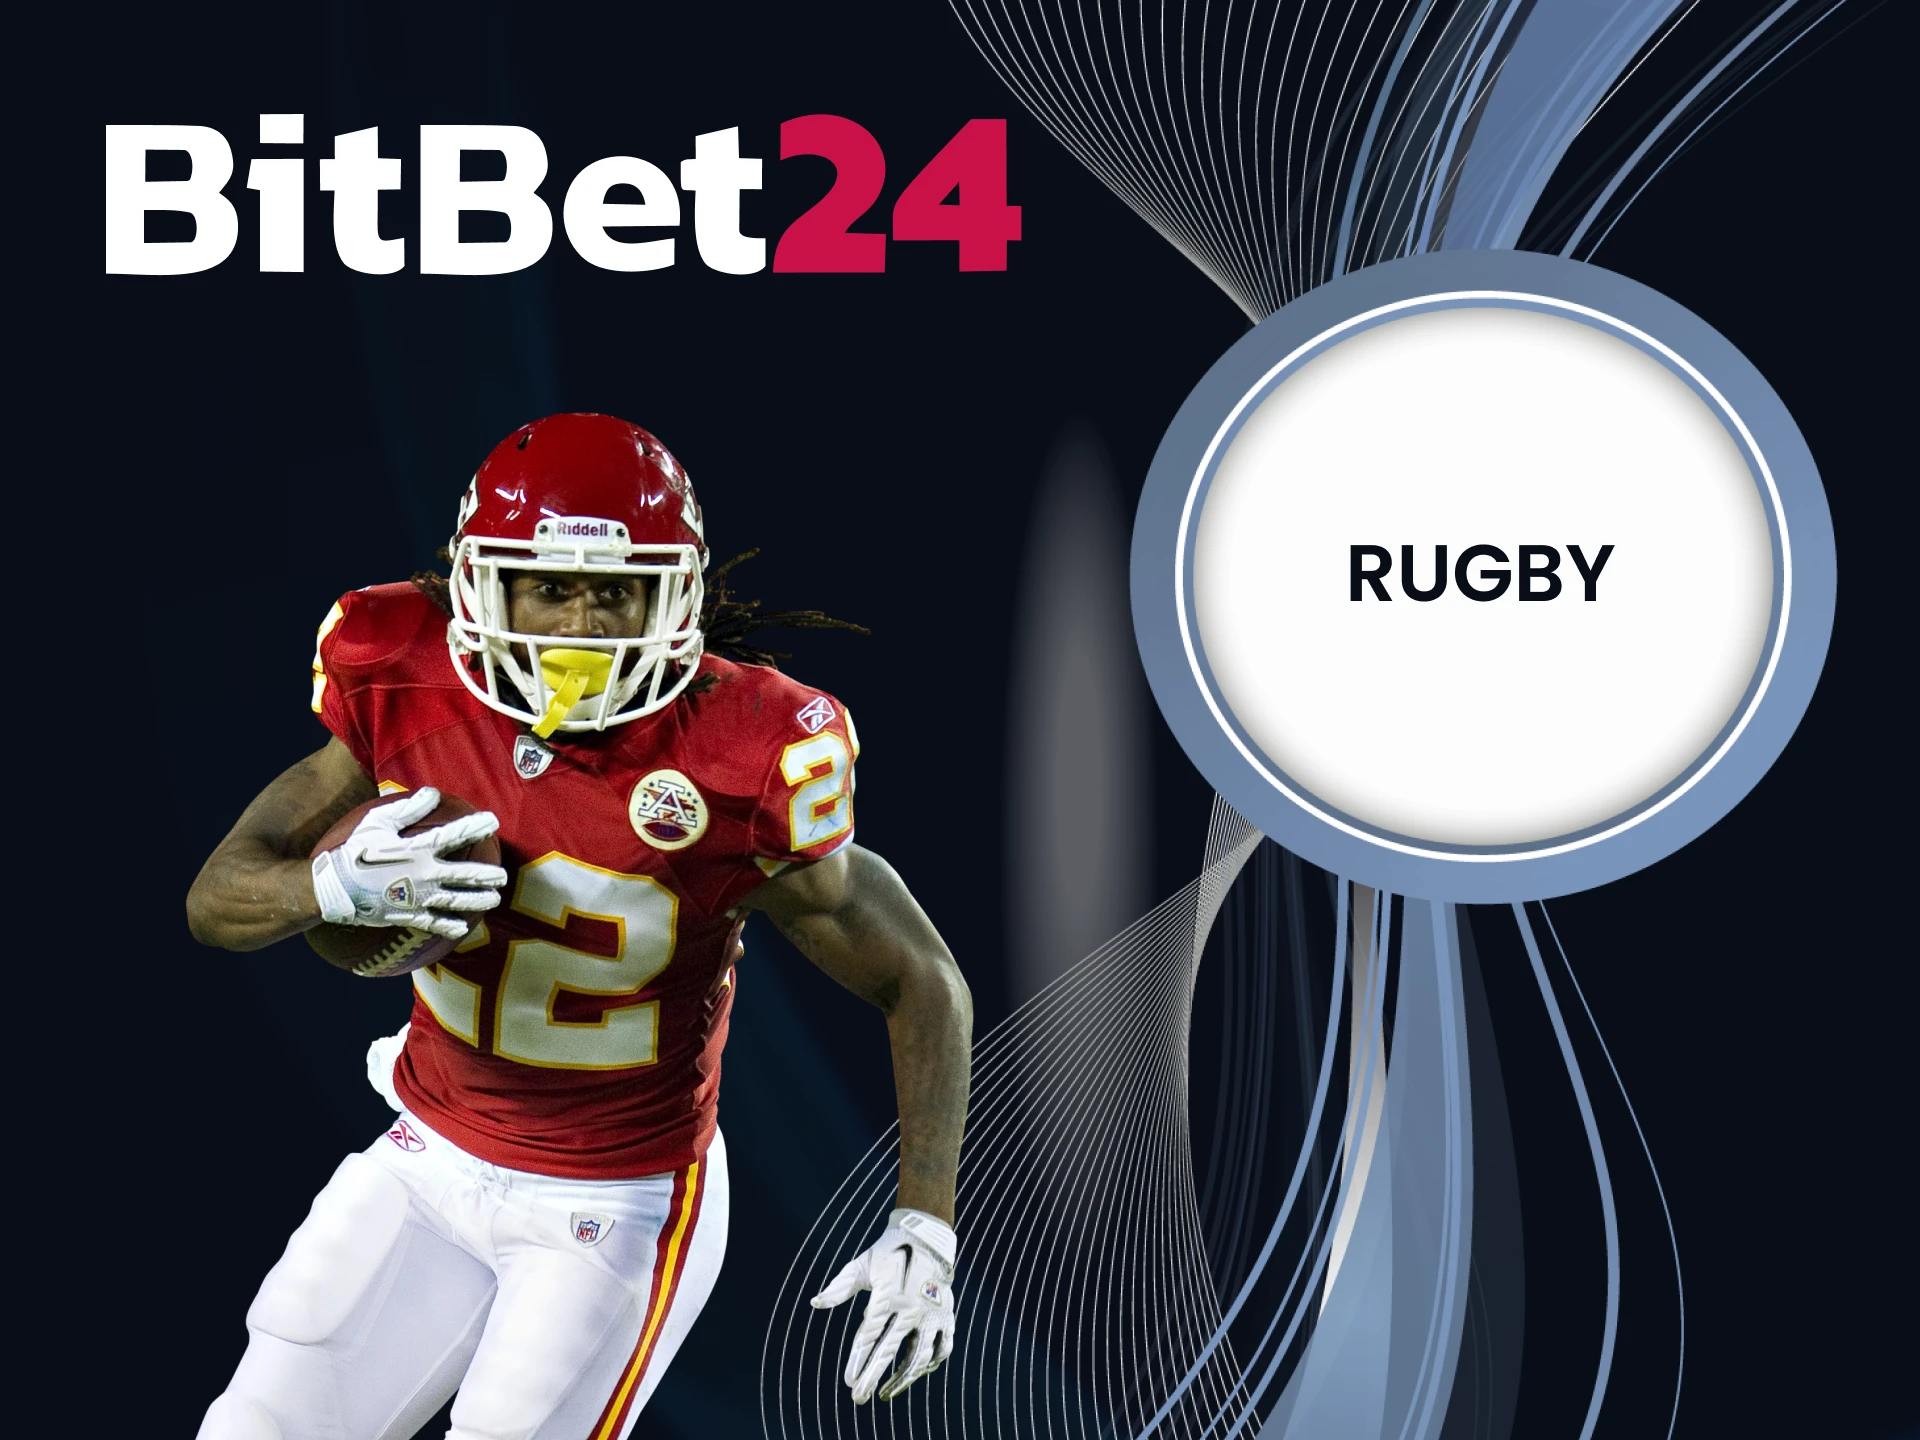 Bet on a rugby match with BitBet24.